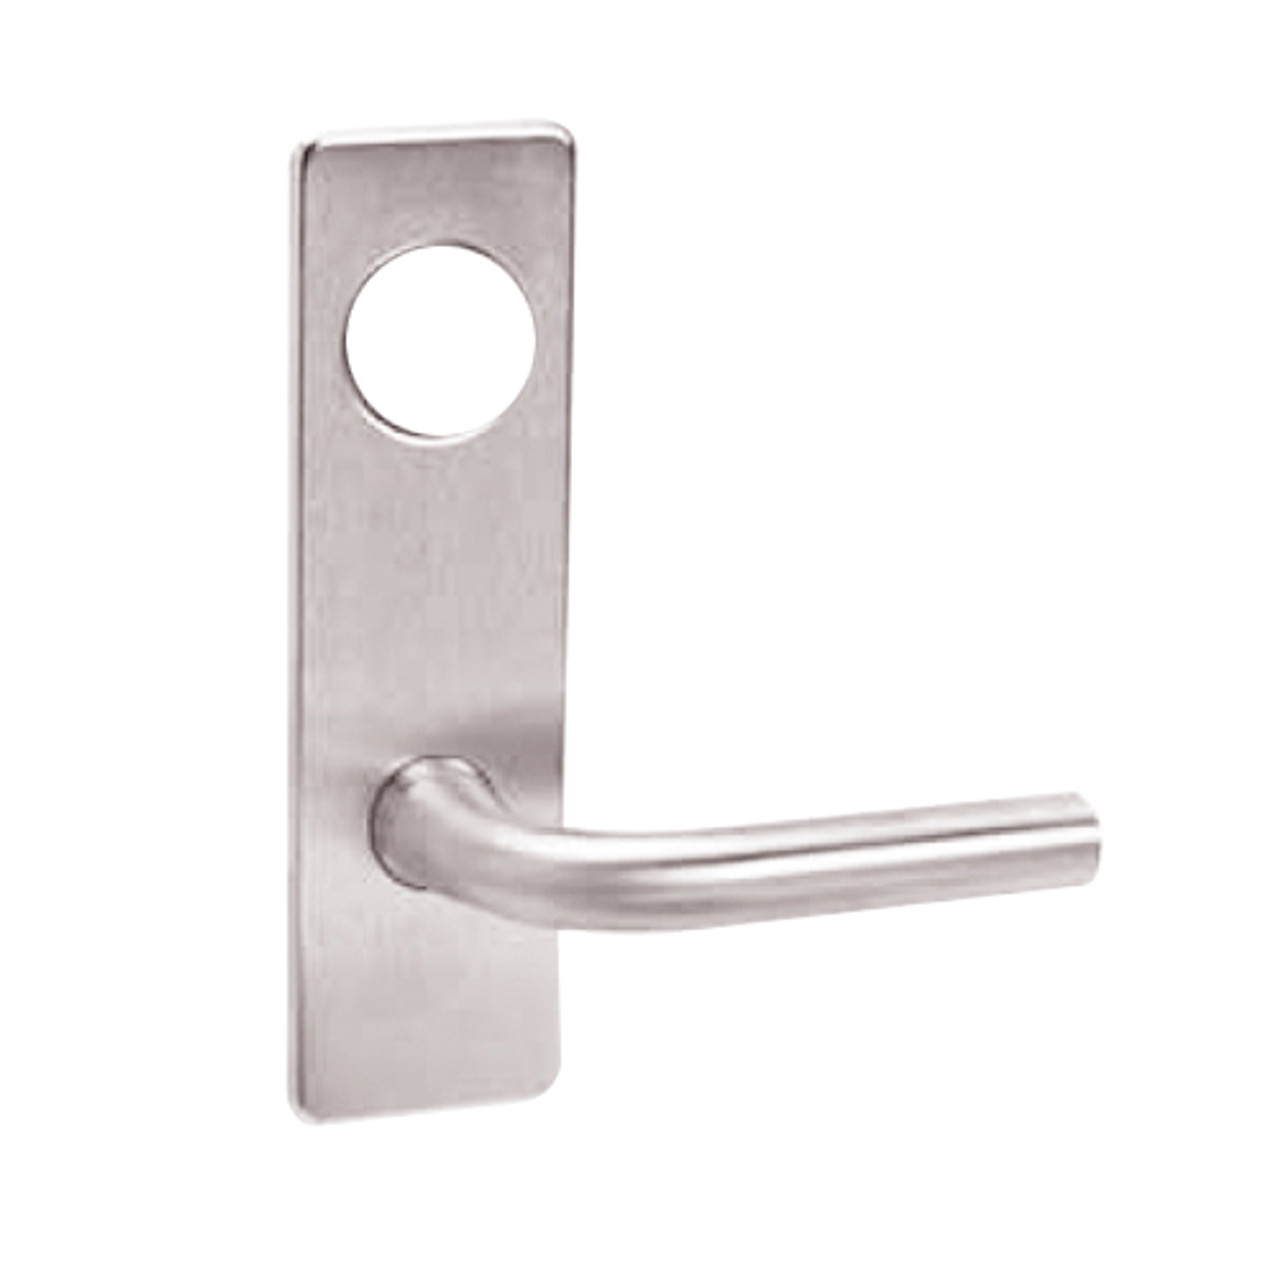 ML2048-RSP-629-LC Corbin Russwin ML2000 Series Mortise Entrance Locksets with Regis Lever in Bright Stainless Steel